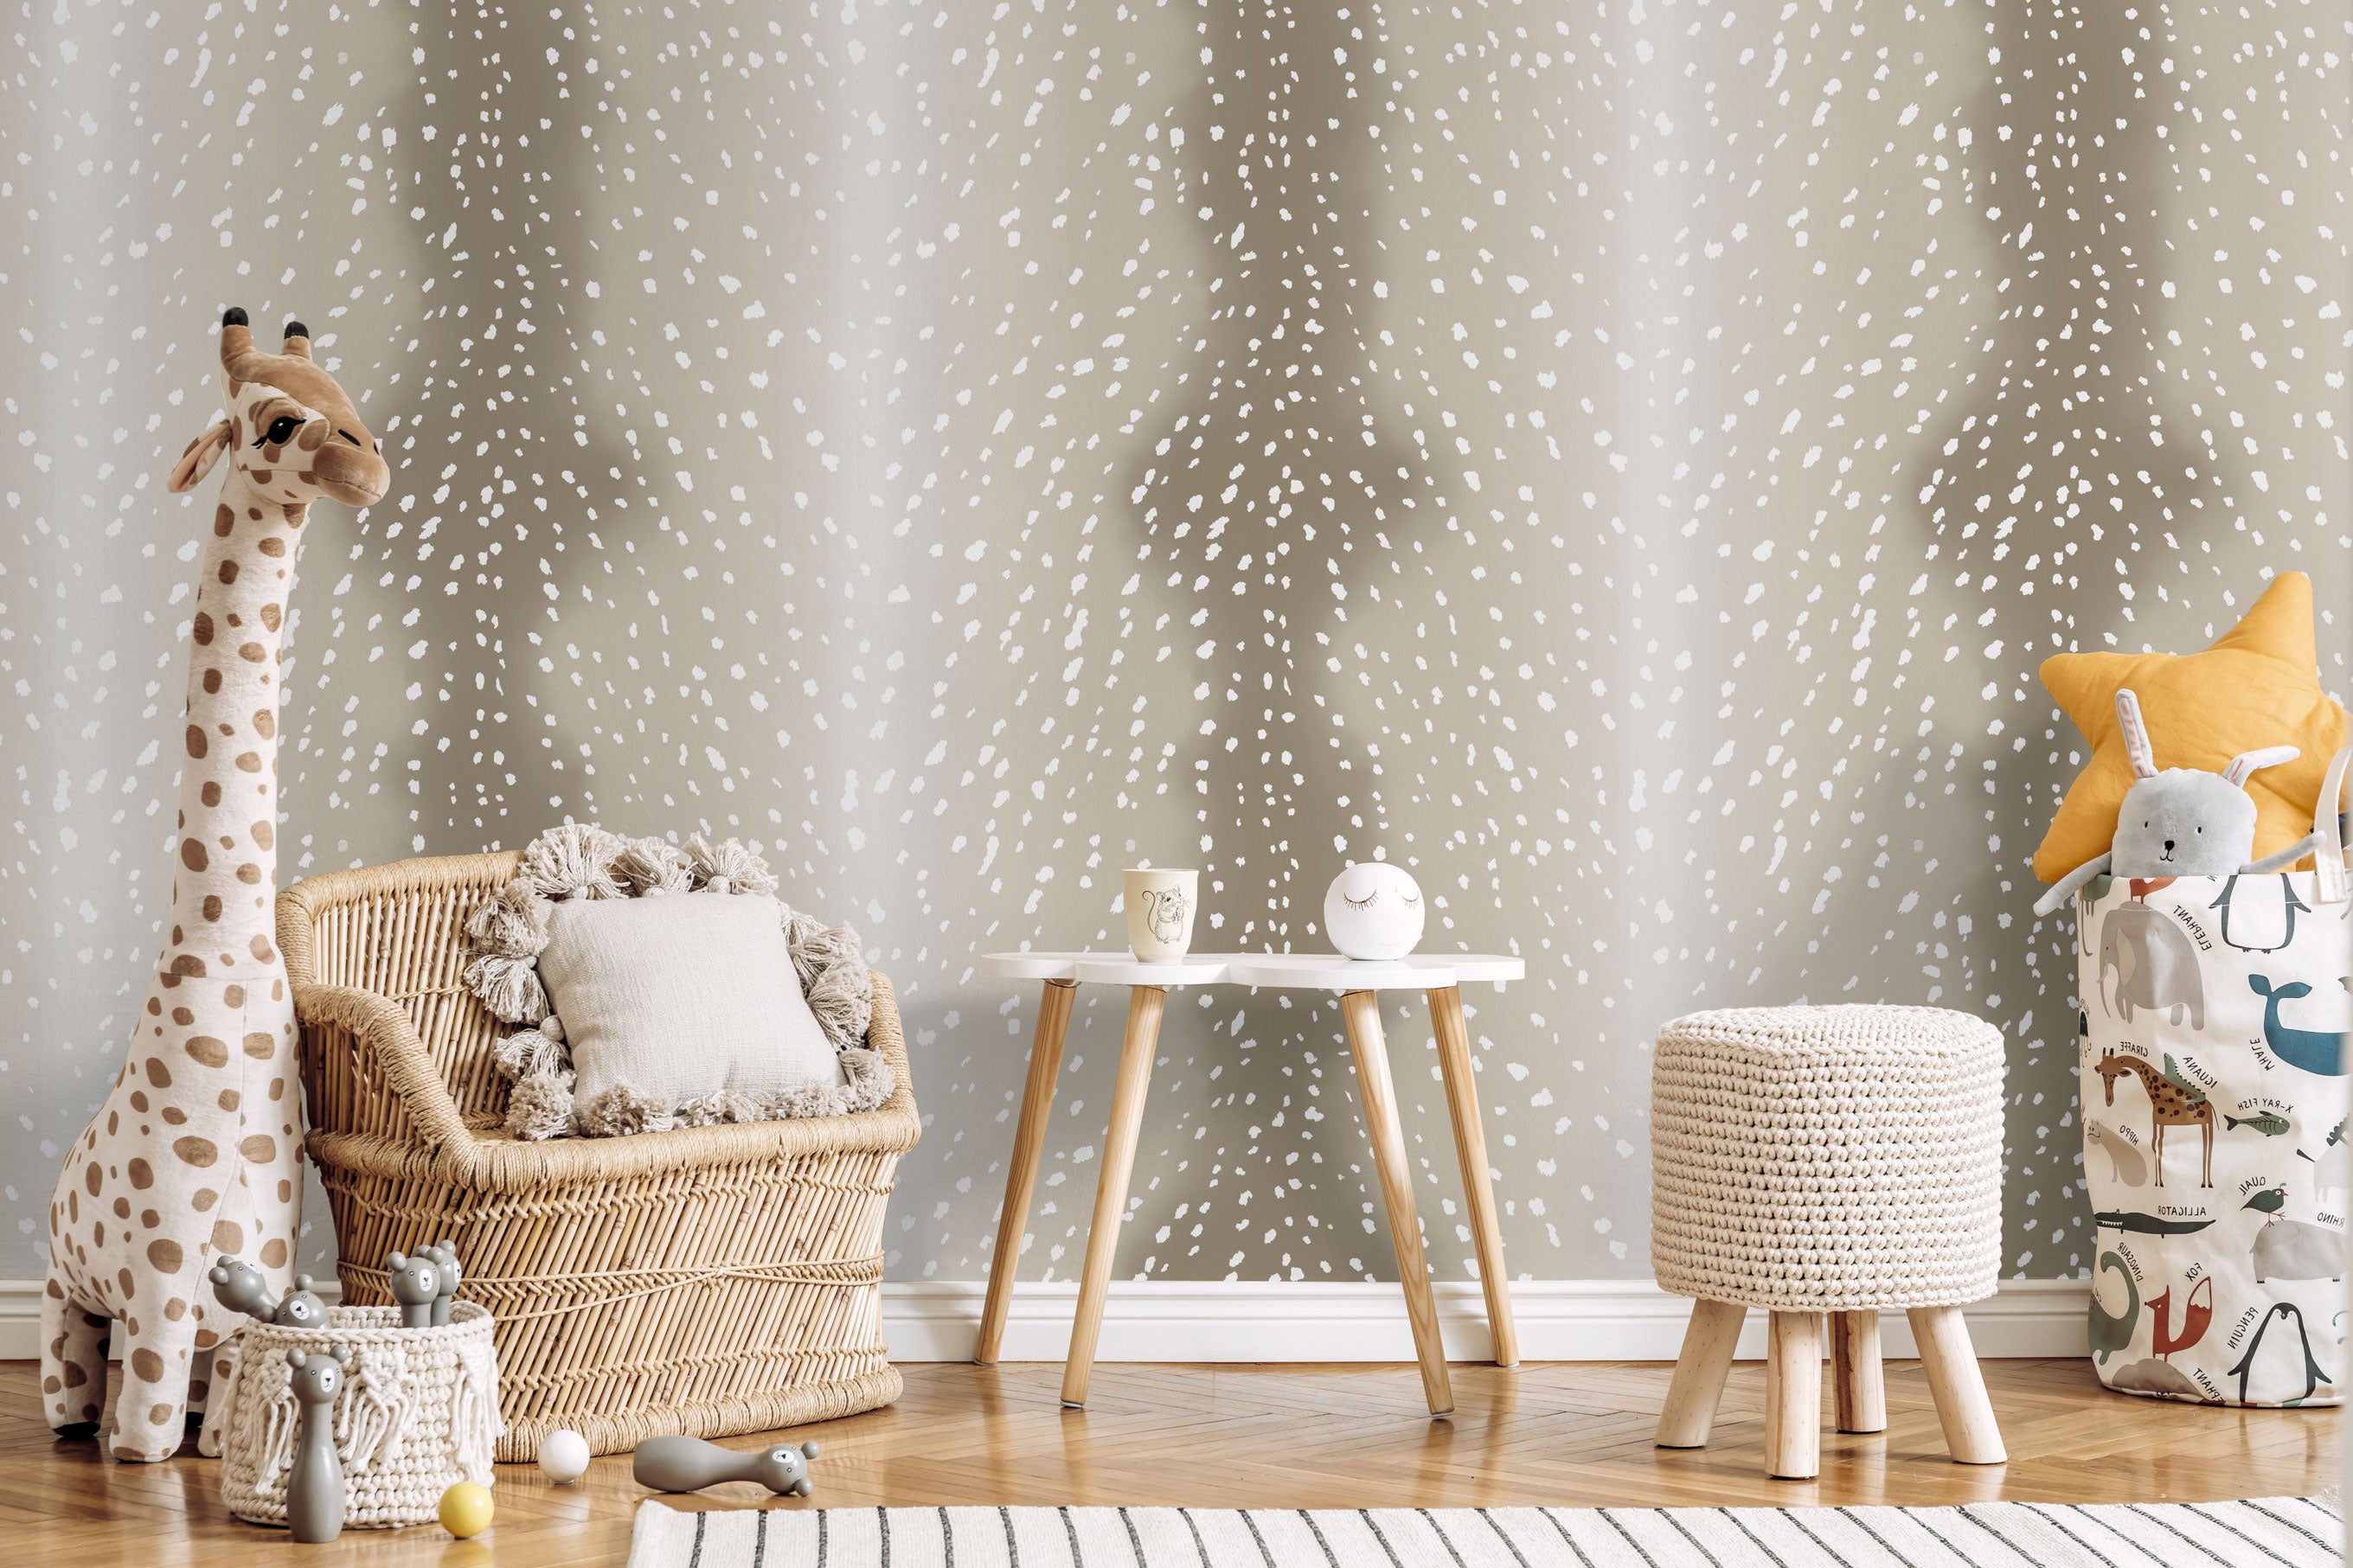 Girls Just Wanna Have FAWN Wallpaper Wallpaper - The Chelsea DeBoer Line from WALL BLUSH